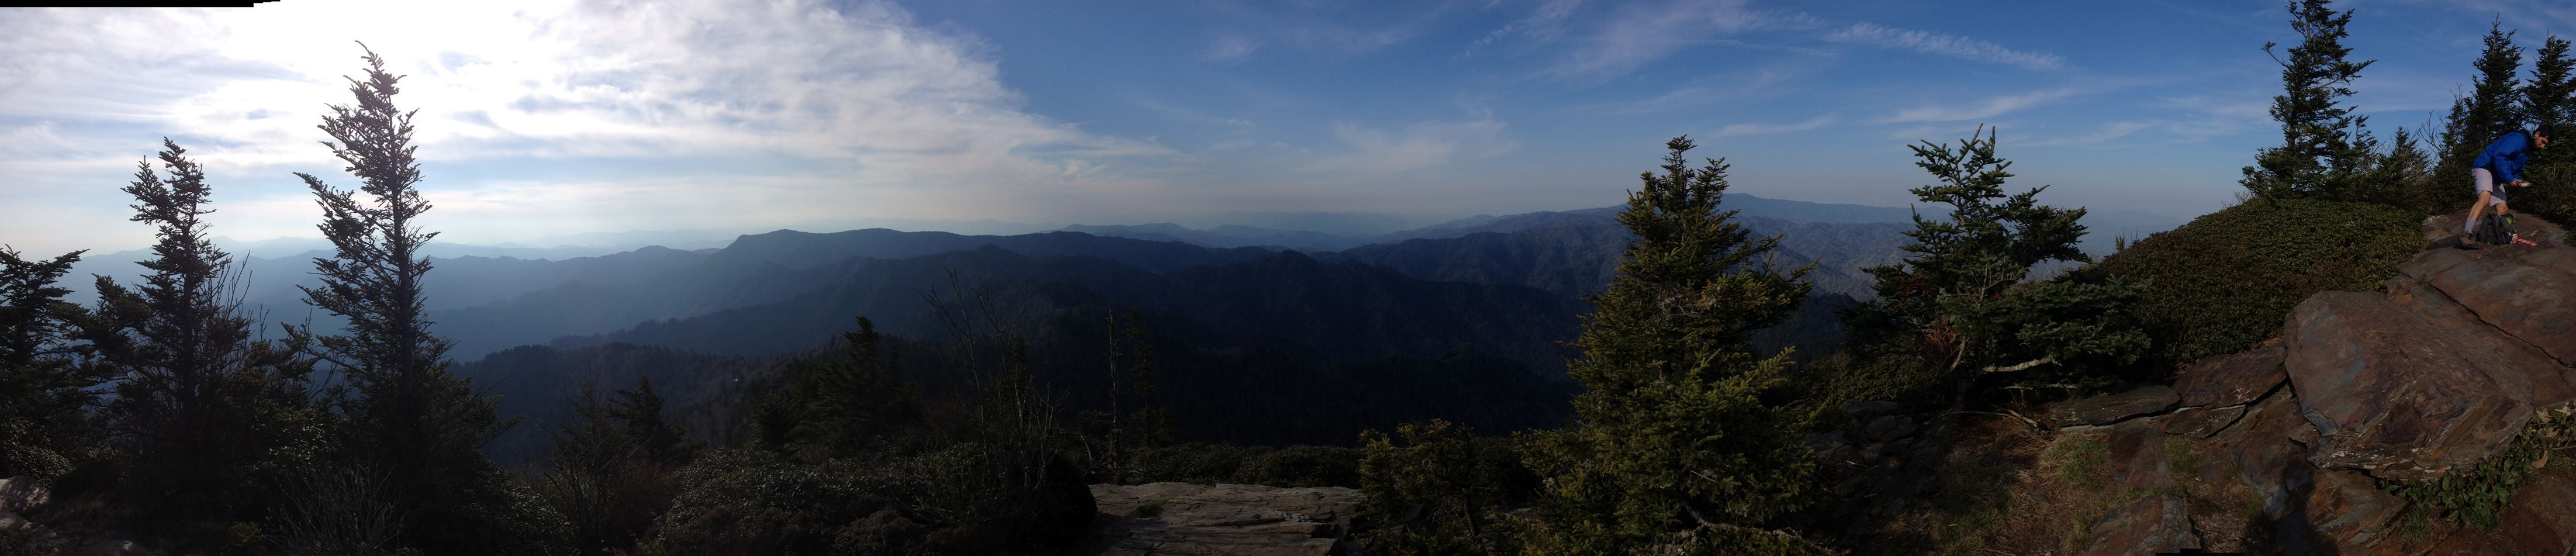 Camper submitted image from Mount LeConte Shelter — Great Smoky Mountains National Park - 1